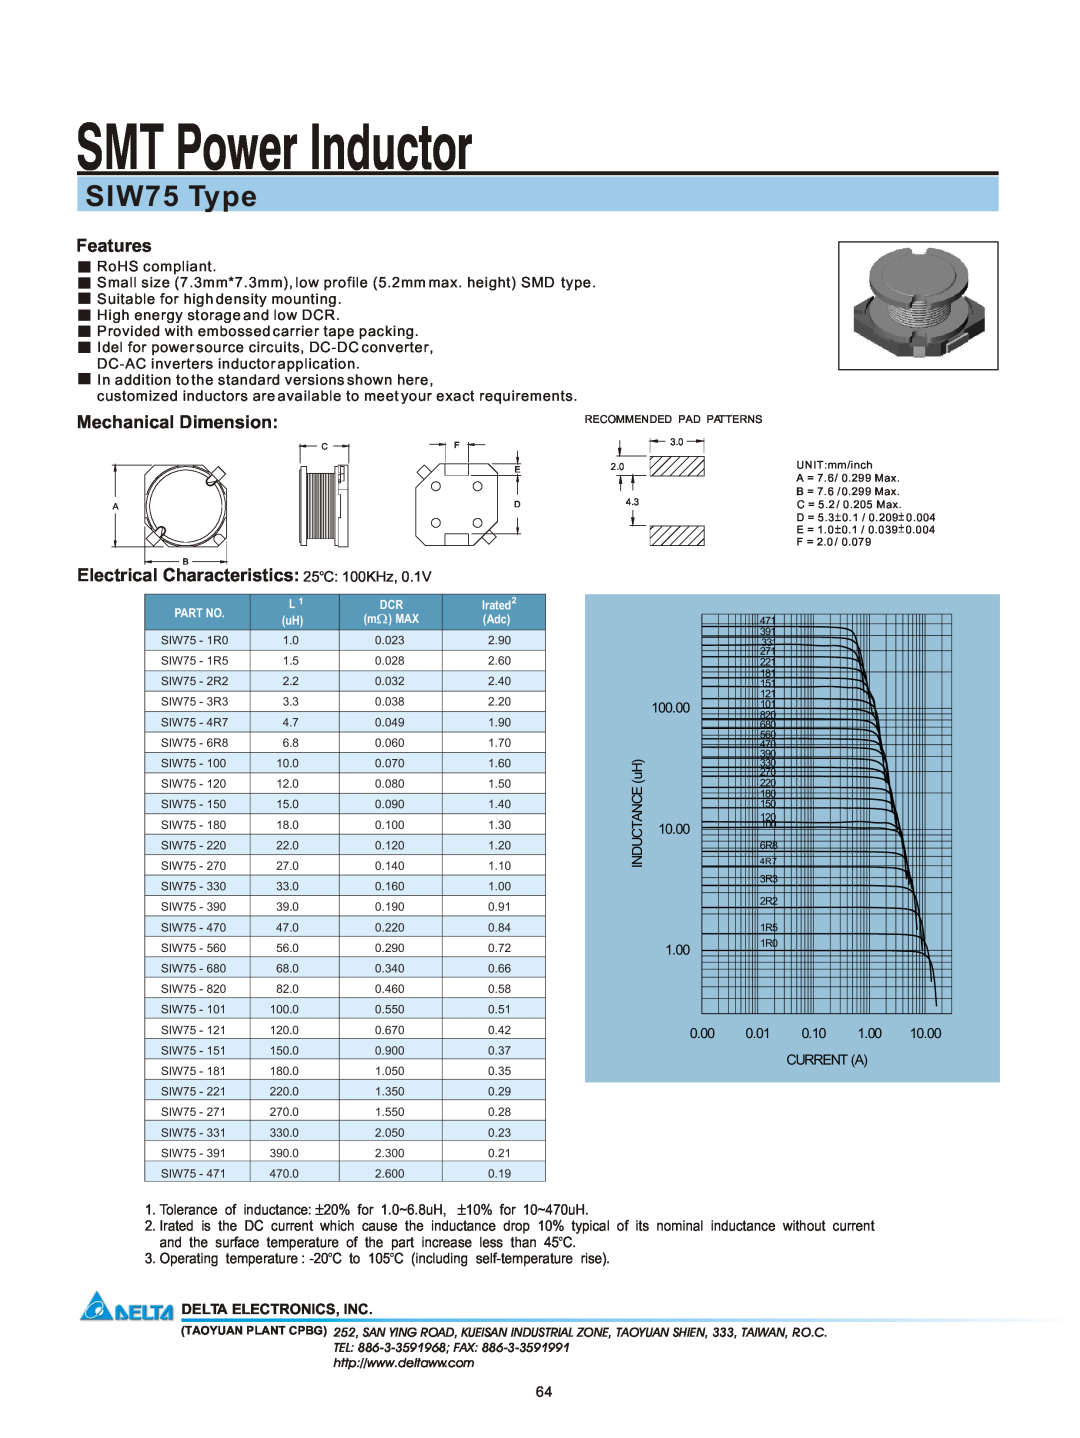 Delta Electronics manual SMT Power Inductor, SIW75 Type, Features, Mechanical Dimension, Delta Electronics, Inc 